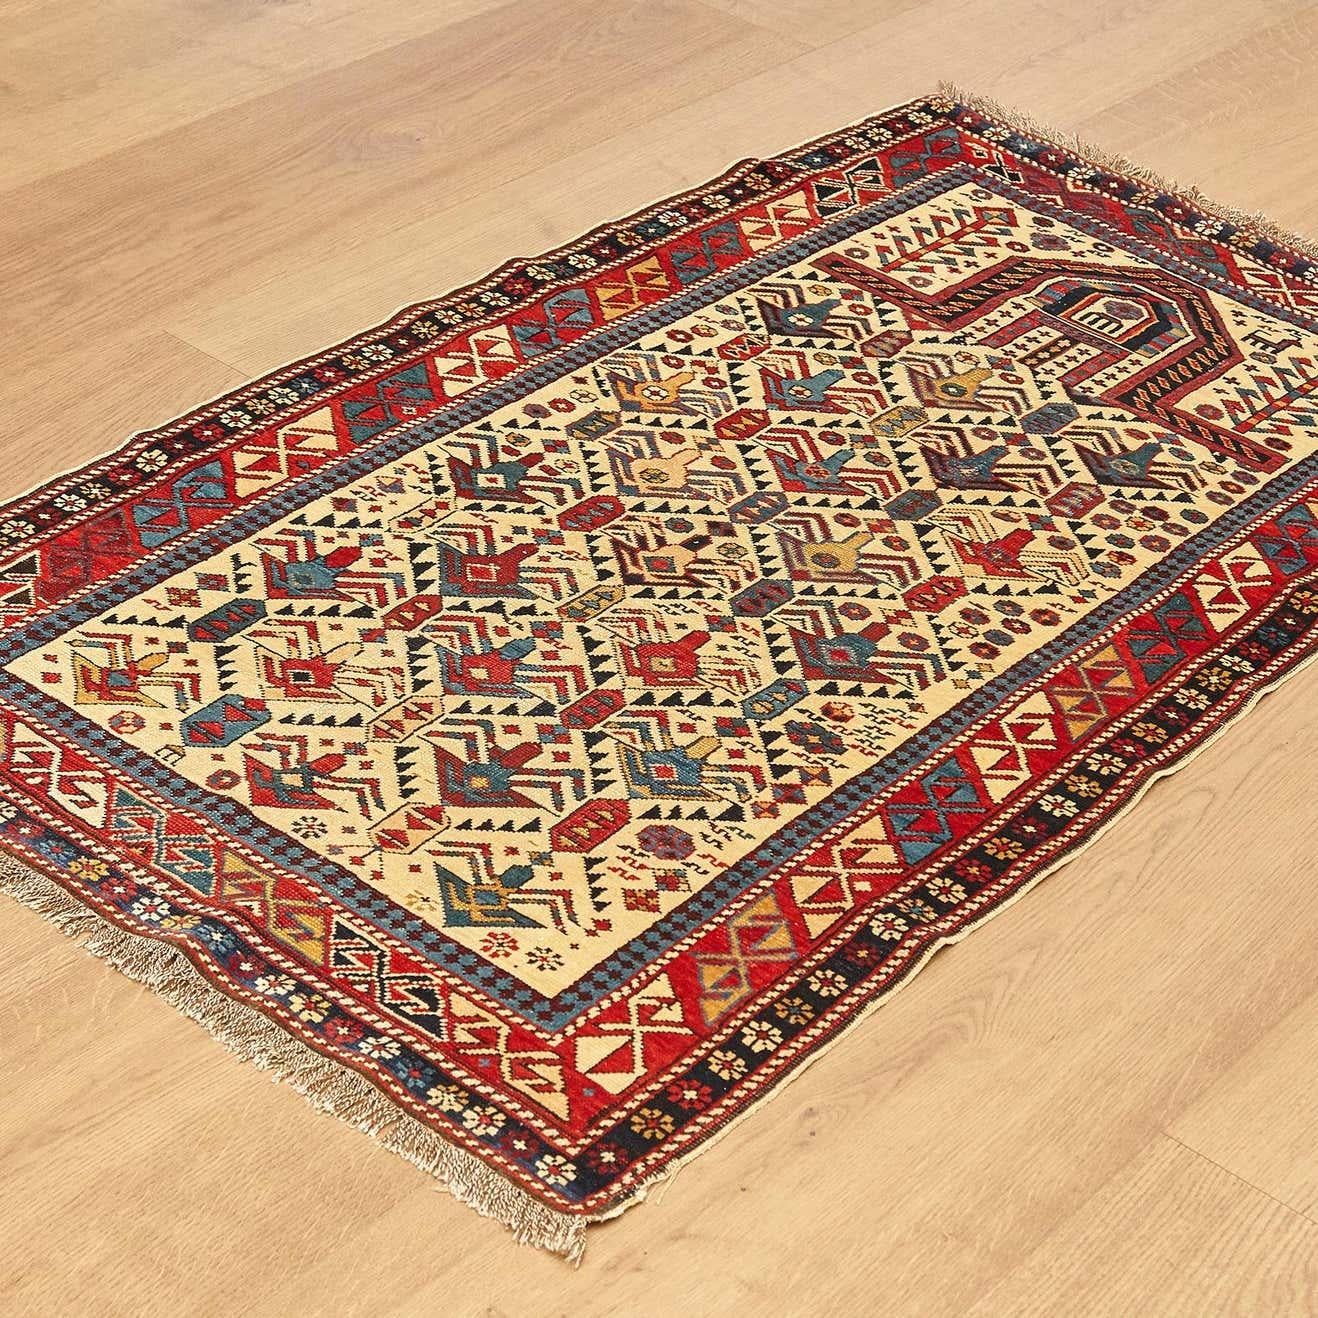 Antique rug from Caucas Daghestan, circa 1880.

Hand knotted wool with some restaurations

Measures: 93 x 157.